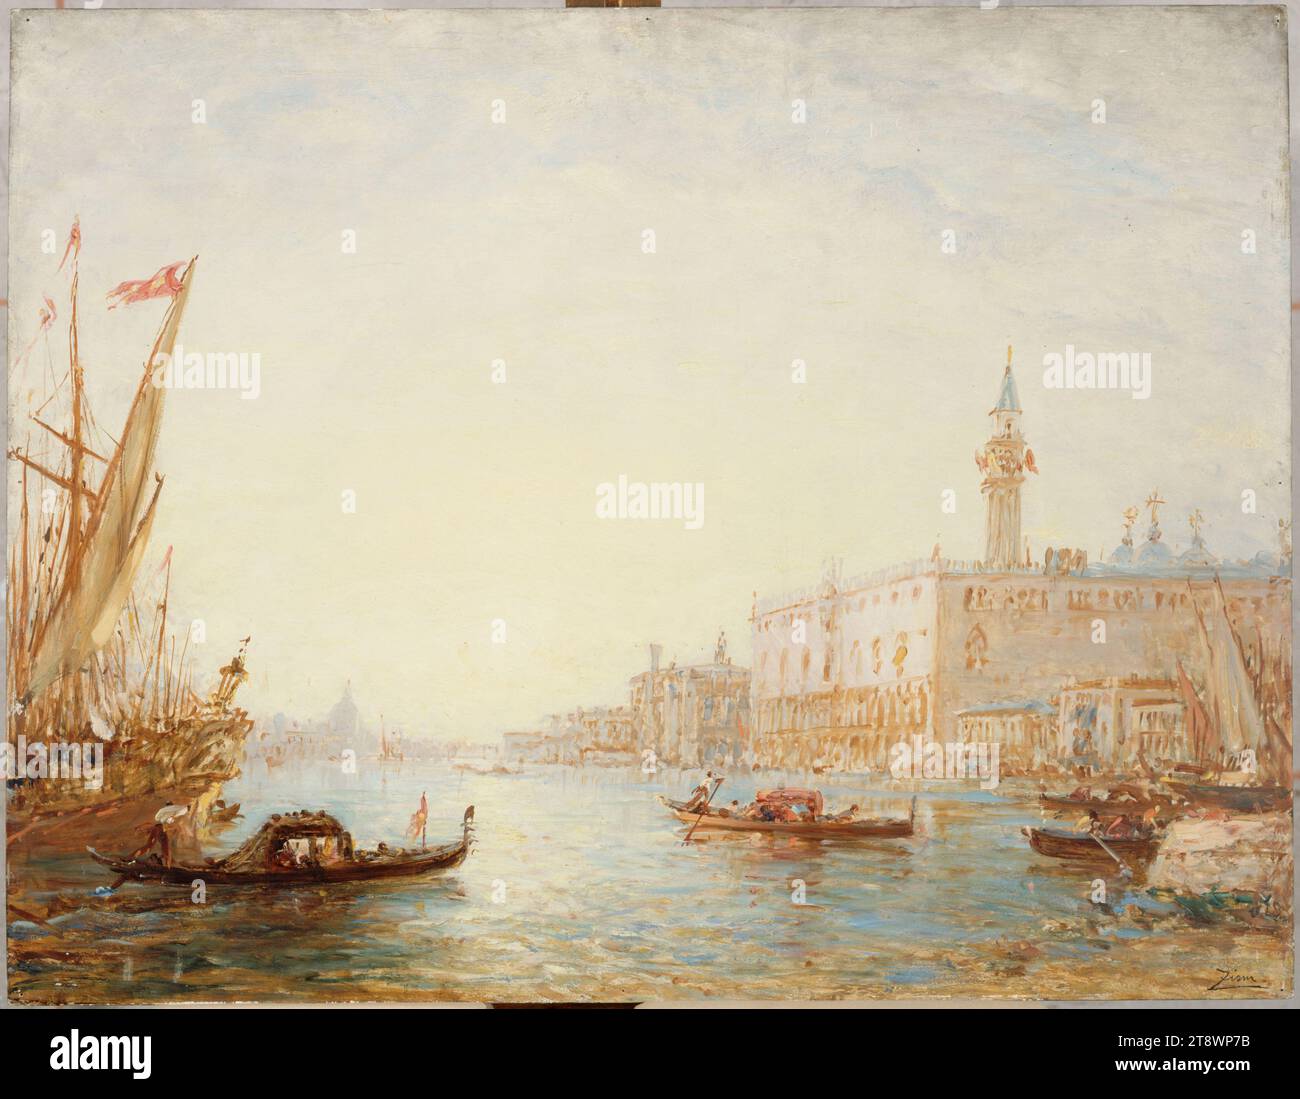 Venice Italy, Doge's Palace, Ziem, Felix, Painter, Between 1870 and 1890, 2nd half of the 19th century, Painting, Oil painting, Wood, Height: 71.5 cm, Width: 92 cm Stock Photo